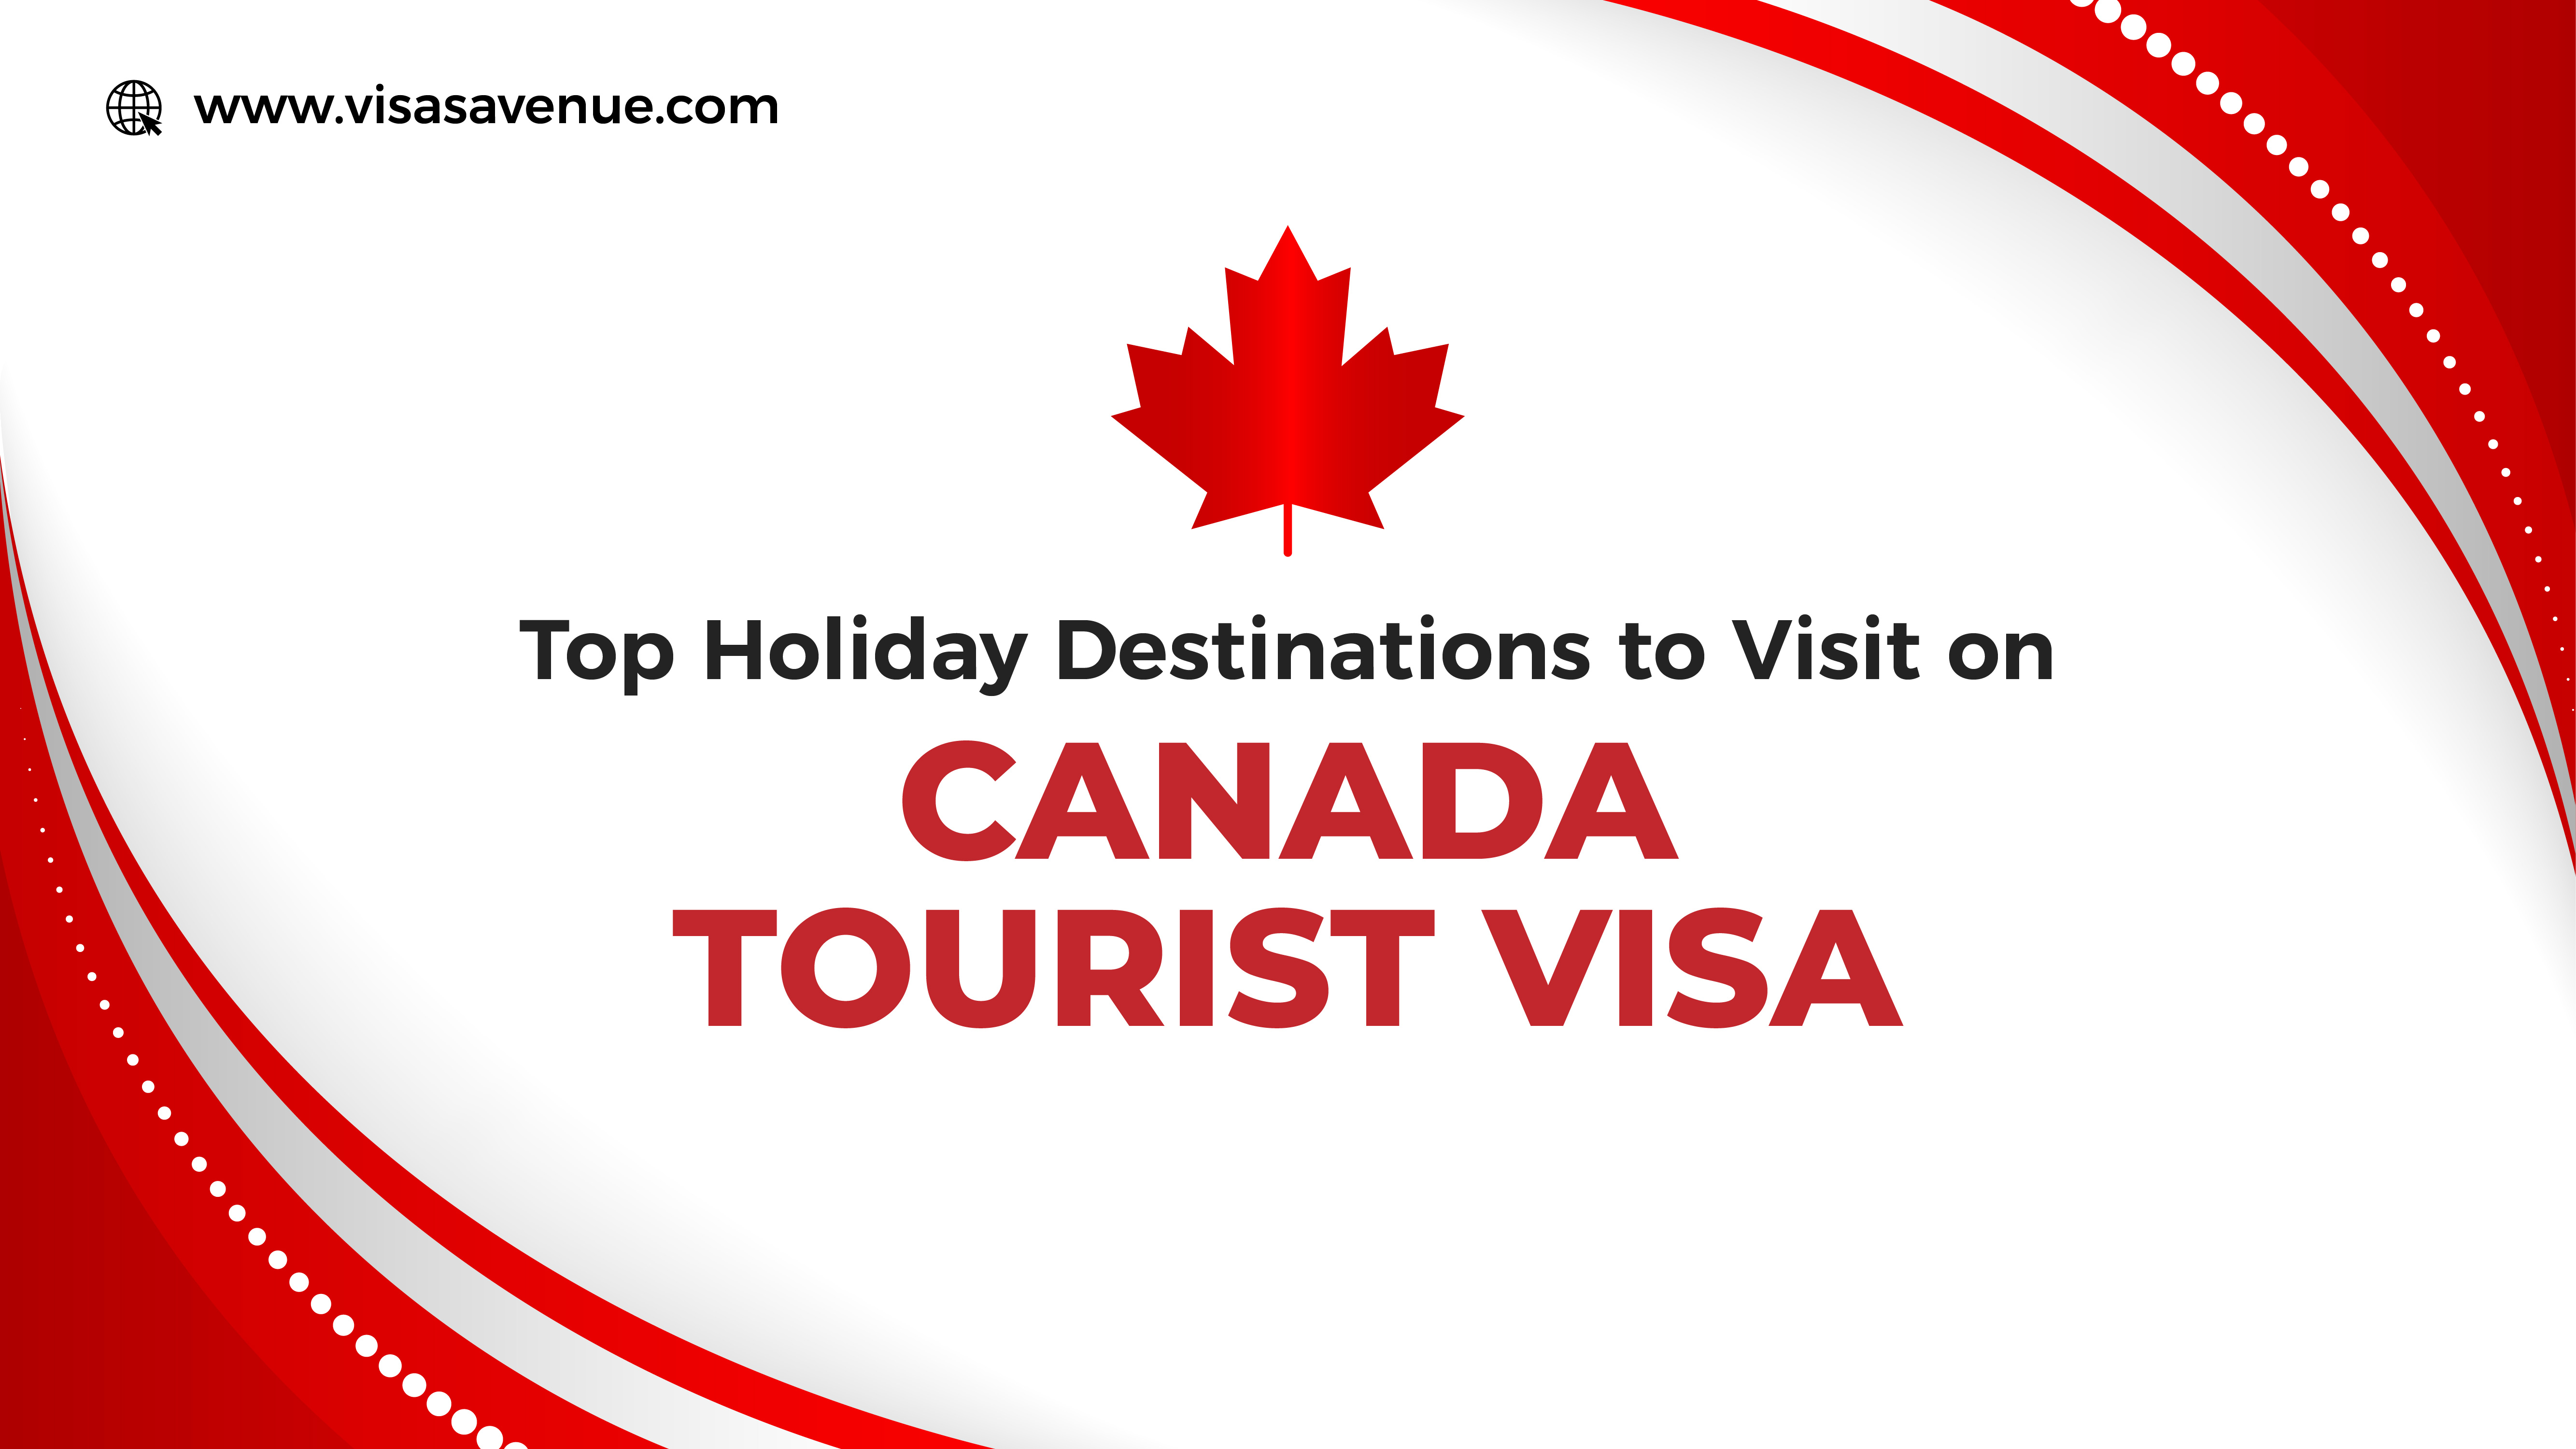 Top Holiday Destinations to Visit on Canada Tourist Visa